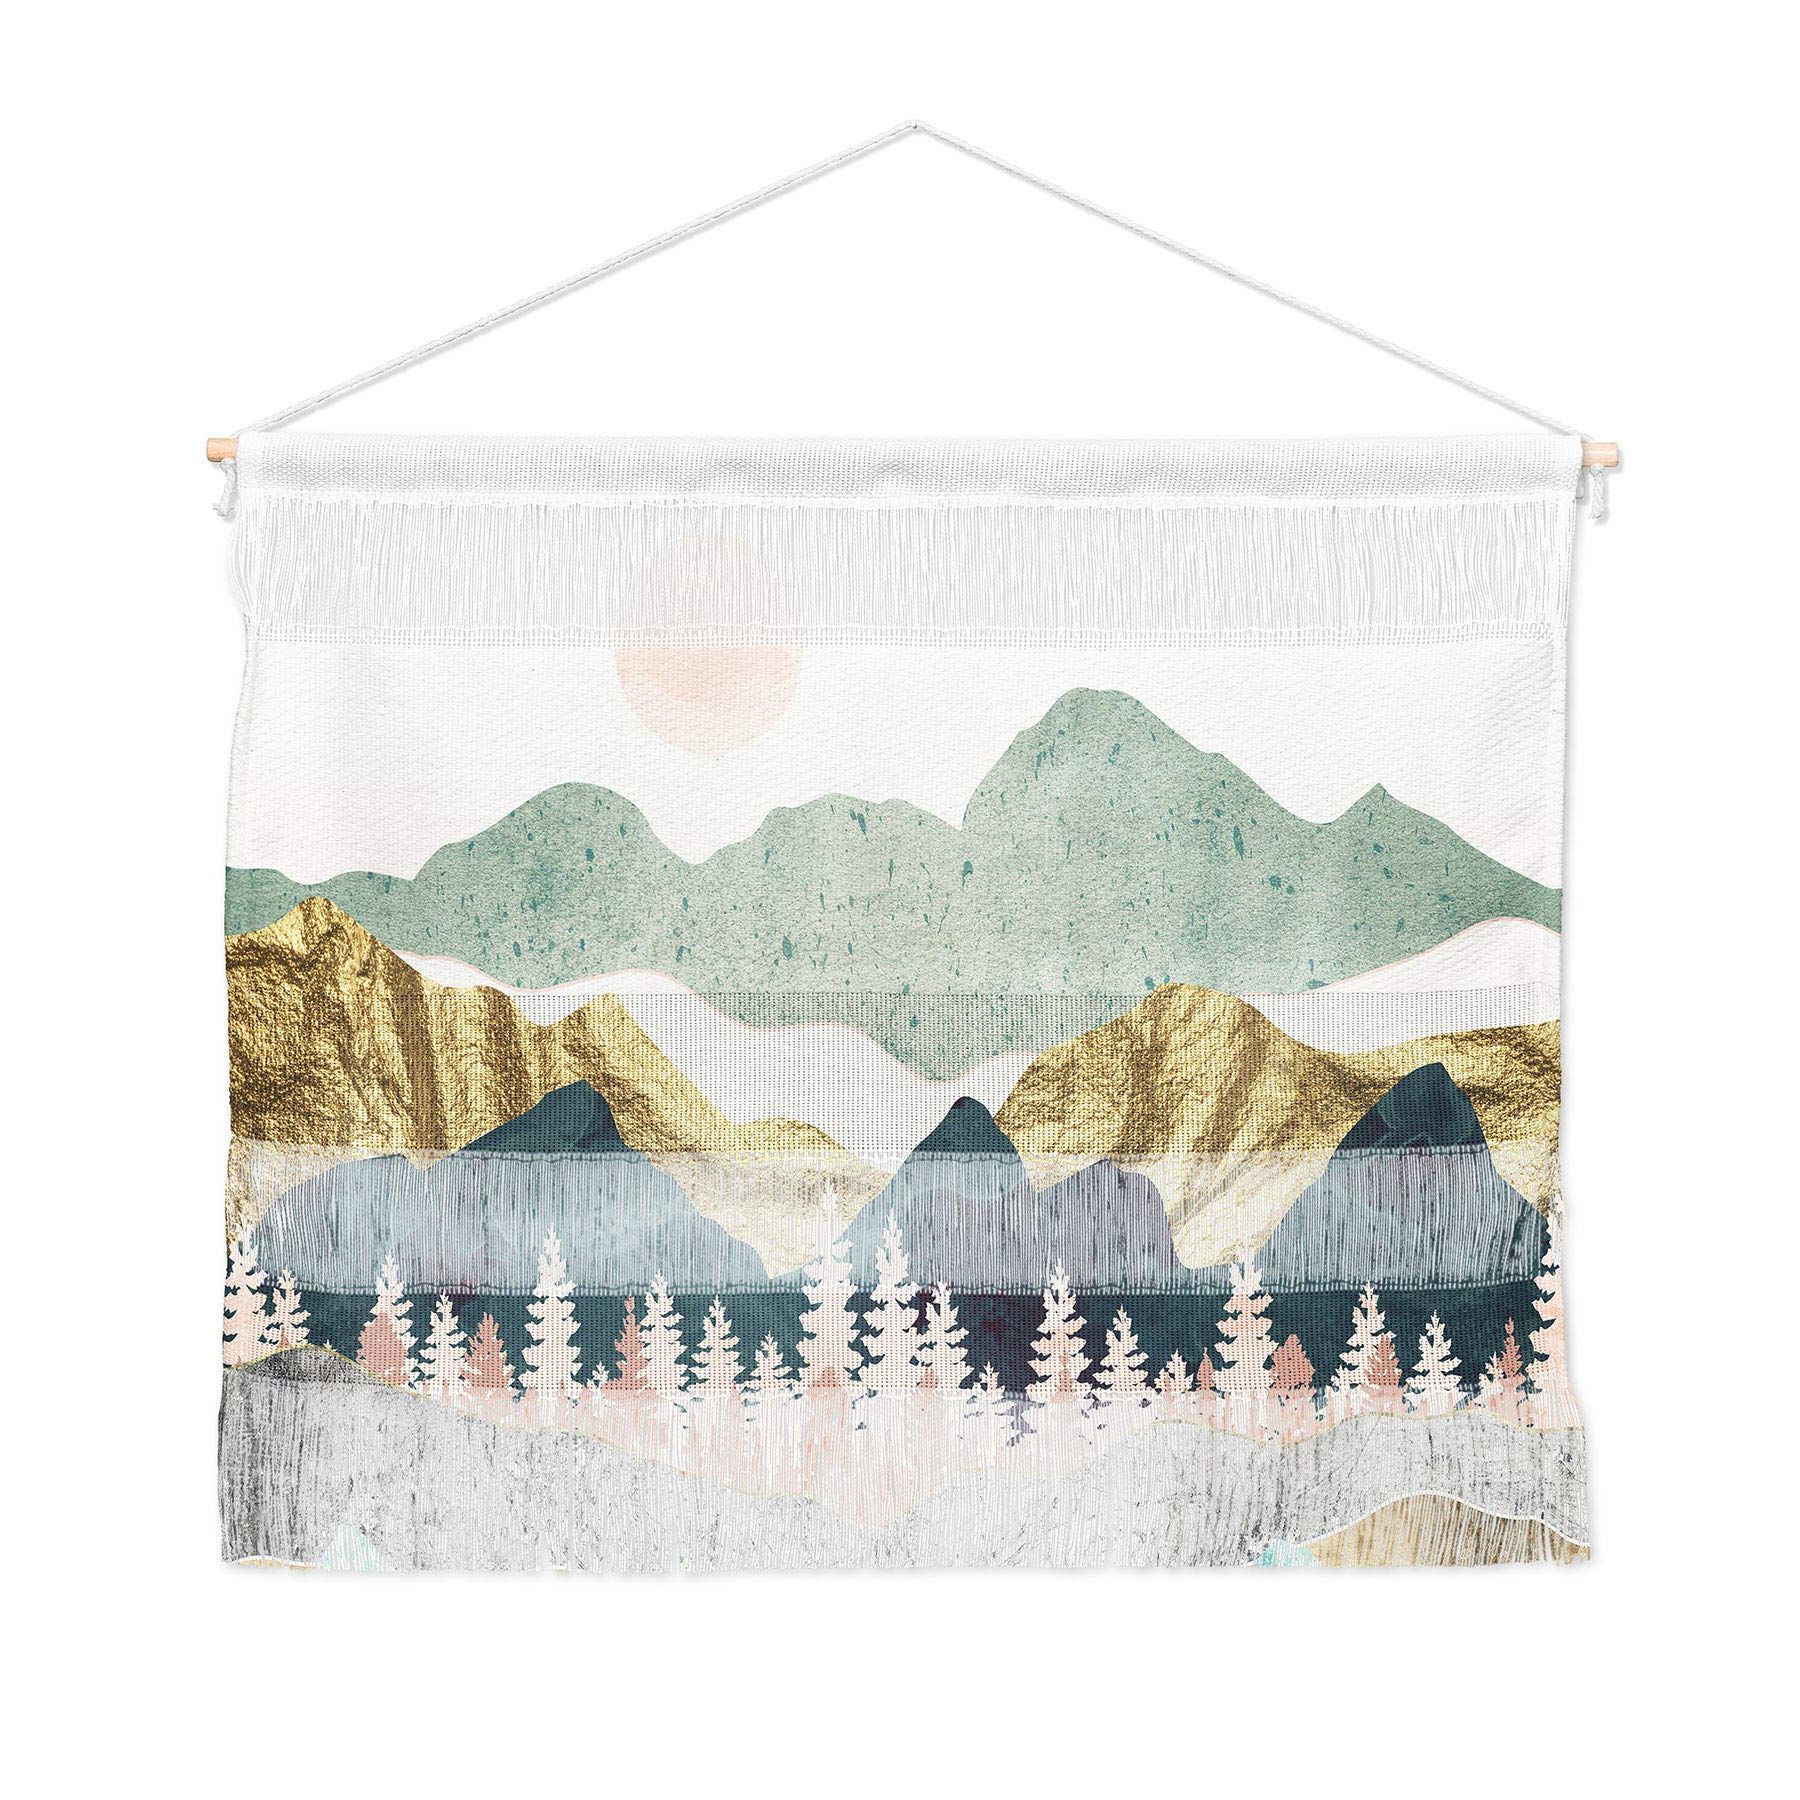 Most Current Amazon: Society6 69790 Wahals Spacefrogdesigns Summer Vista Fiber Wall  Hanging, 22" X 16", Multi : Home & Kitchen Throughout Summer Vista Wall Art (View 5 of 15)